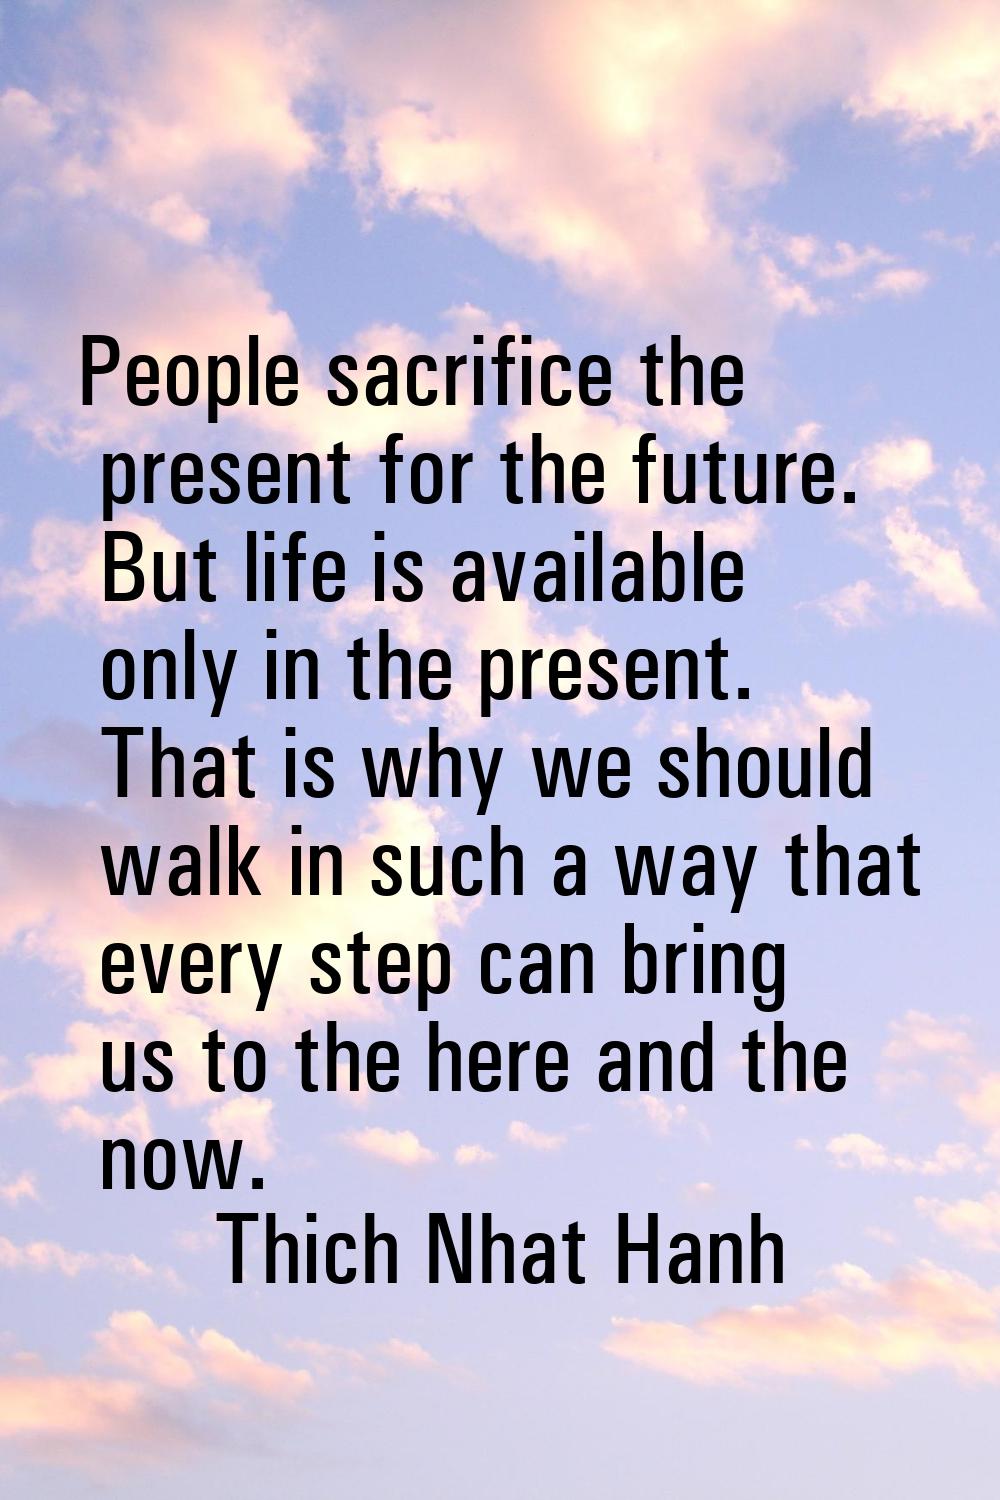 People sacrifice the present for the future. But life is available only in the present. That is why